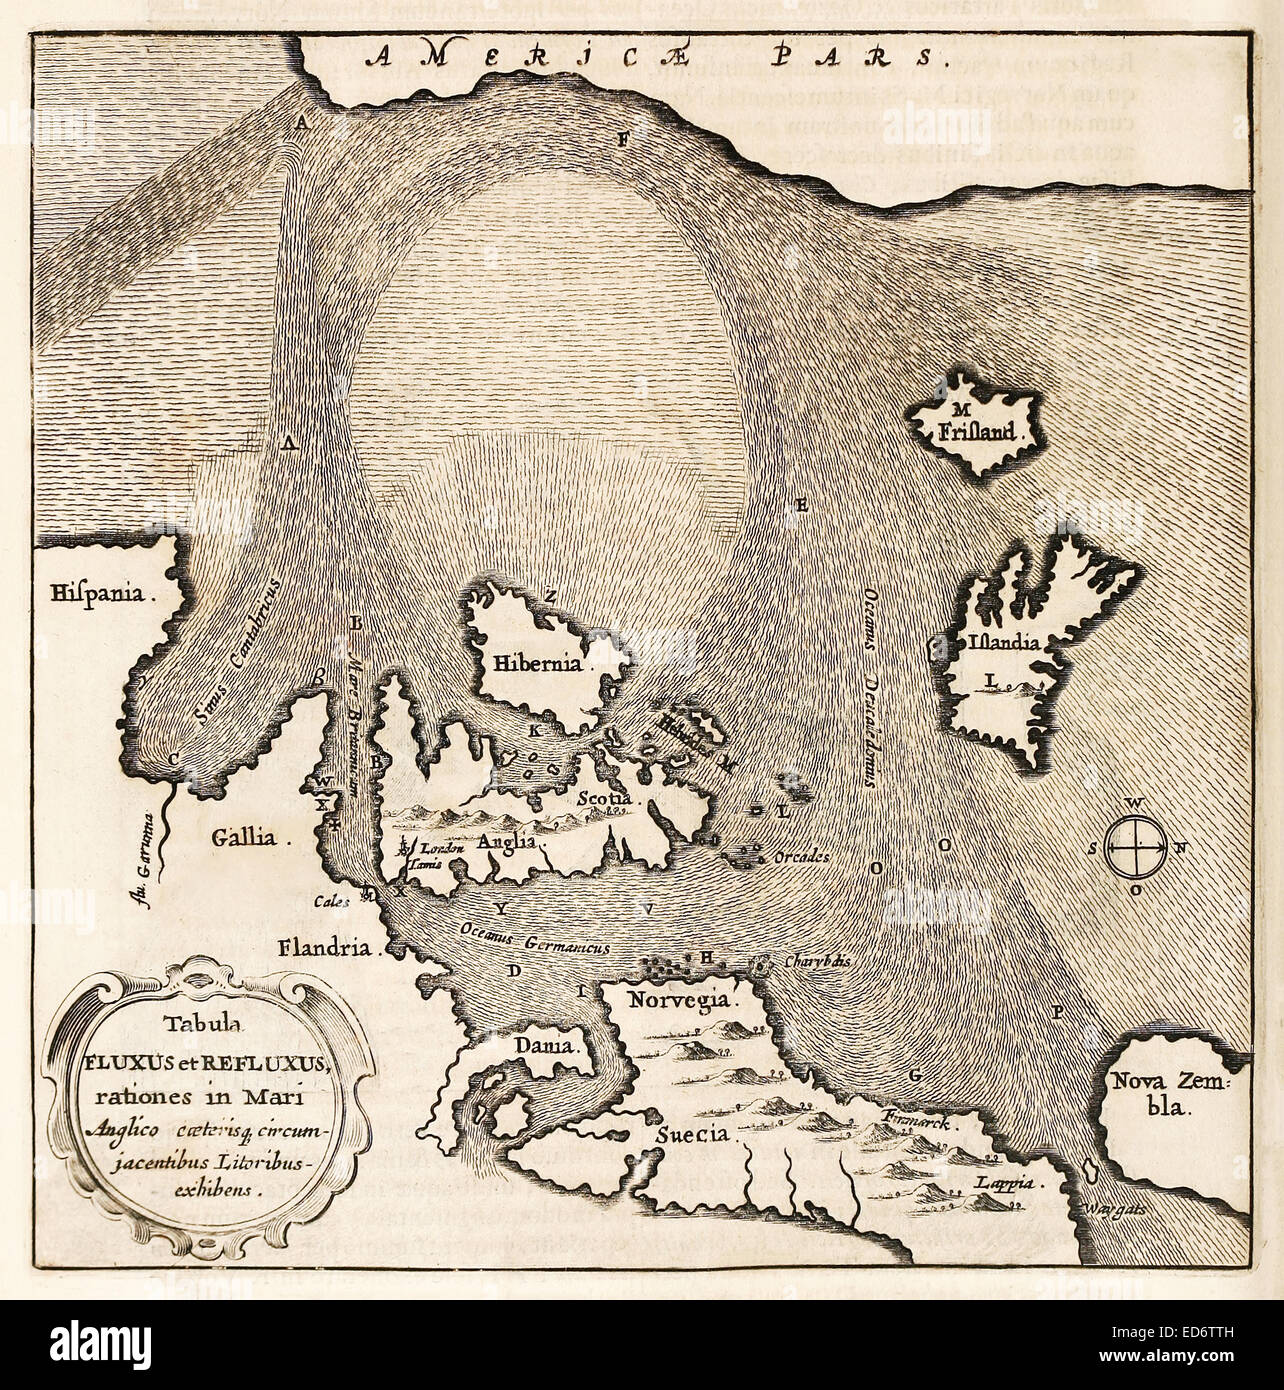 'Tabula Fluxus et Refluxus rationes in Mari Anglico' 17th century map of the North Atlantic showing ocean currents. See description for more information. Stock Photo